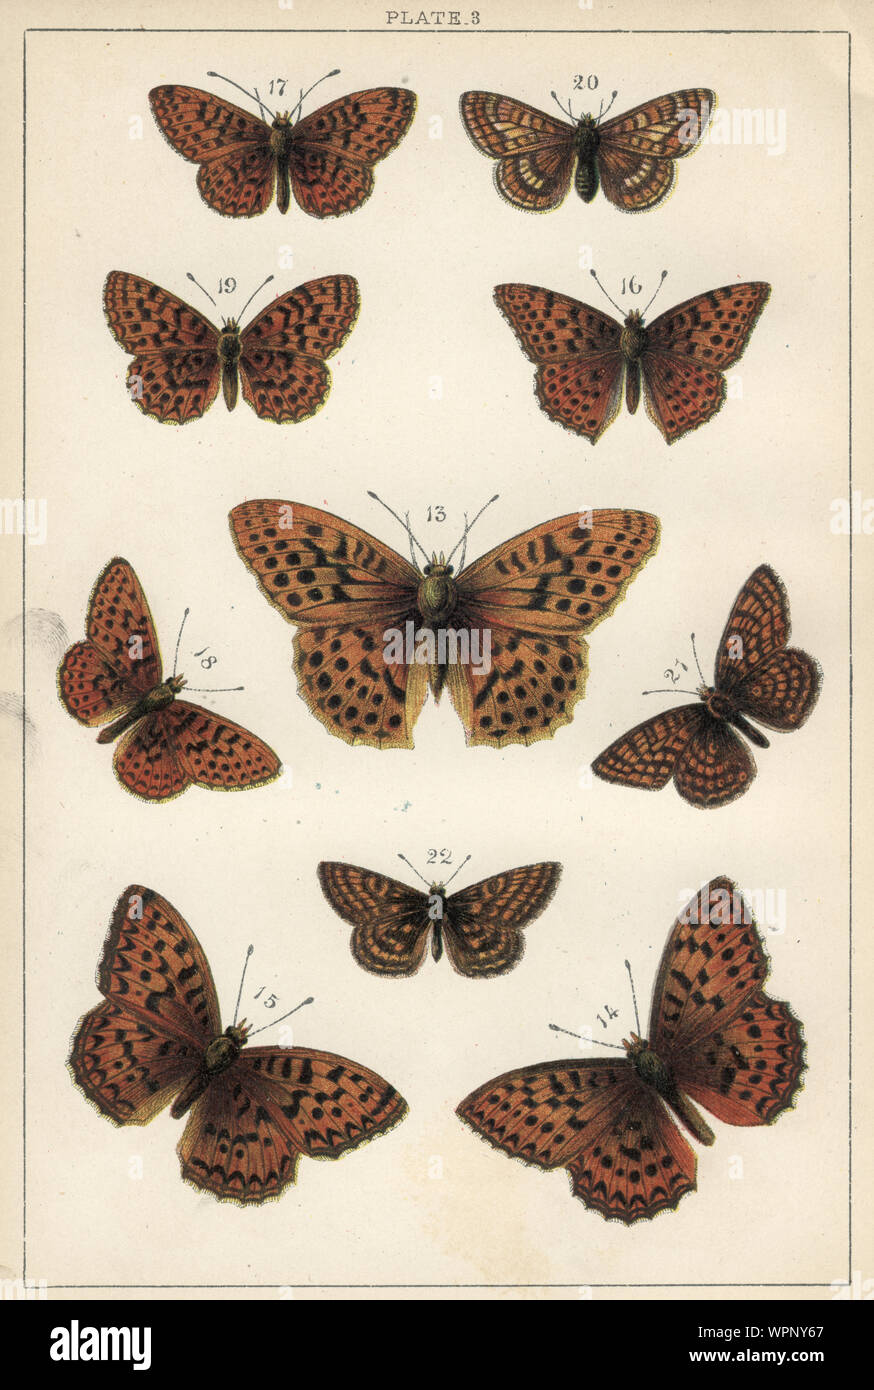 Vintage engraving of Butterflies. 13. Silver washed Fritillary, 14. Dark green Fritillary, 15, High brown Fritillary, 16. Queen of spain Fritillary, 17. Small pearl bordered Fritillary, 18. Pearl border Fritillary, 19. Weaver's Fritillary, 20. Greasy Fritillary, 21. Glanville Fritillary, 22. heath Fritillary. Our Country's Butterflies and Moths and how to Know Them: A Guide to the Lepidoptera of Great Britain Stock Photo